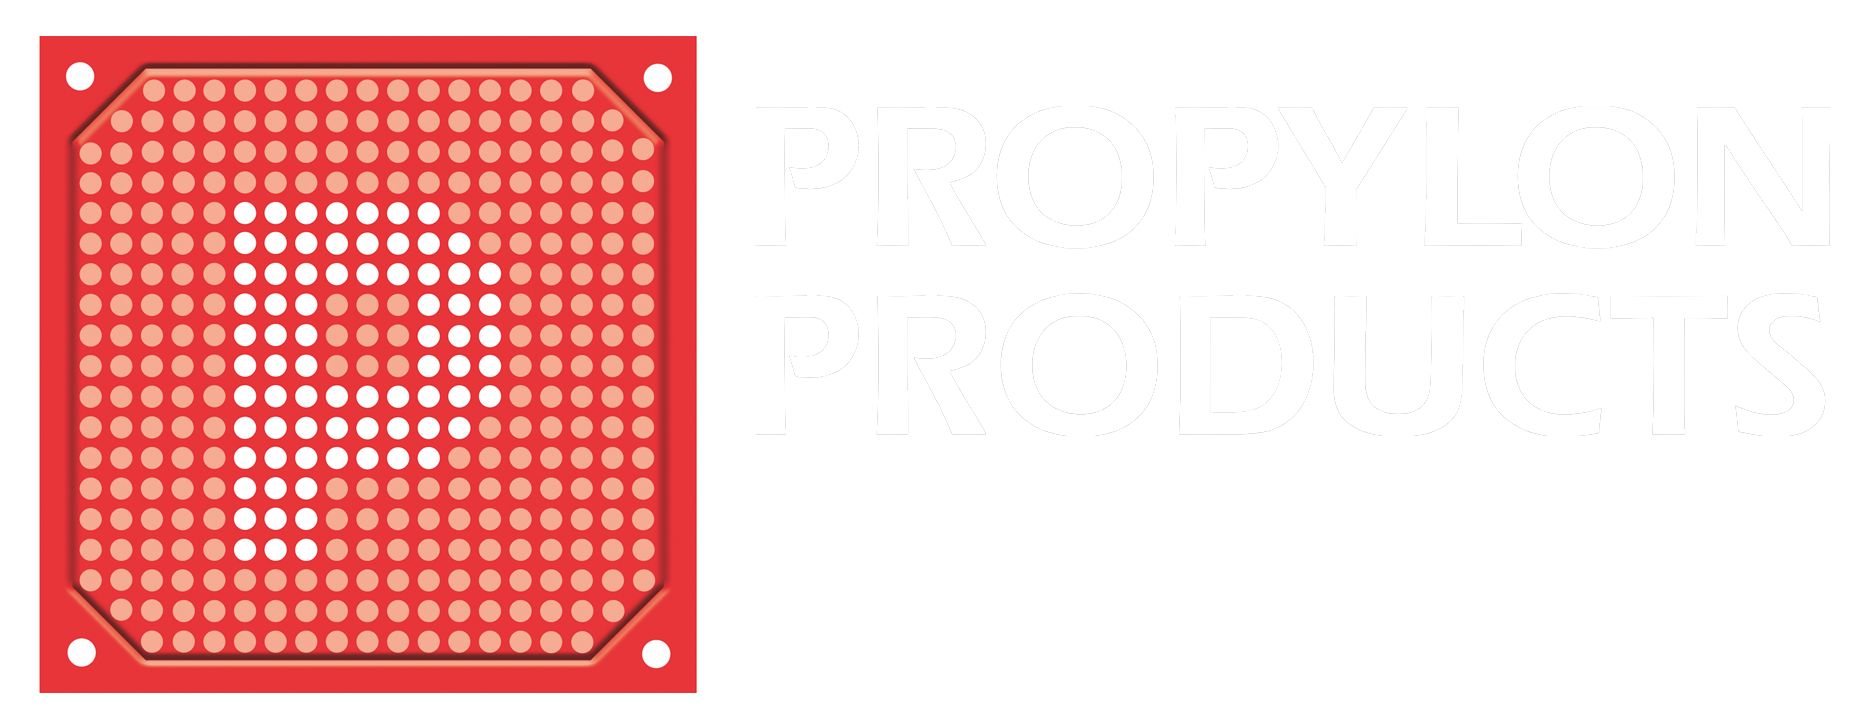 PropylonProducts